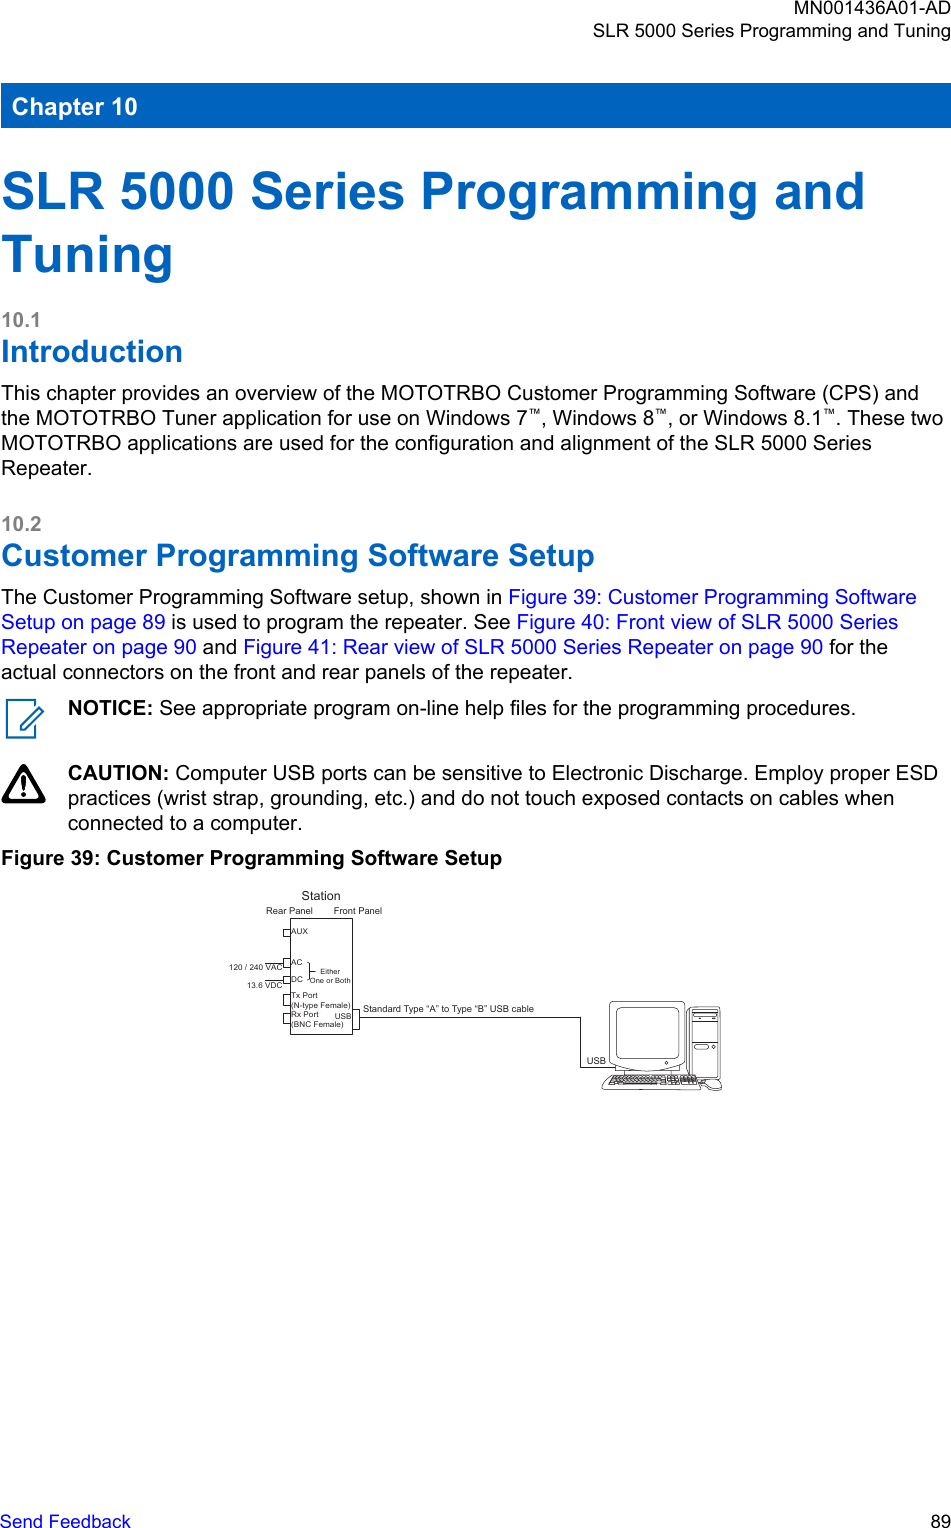 Chapter 10SLR 5000 Series Programming andTuning10.1IntroductionThis chapter provides an overview of the MOTOTRBO Customer Programming Software (CPS) andthe MOTOTRBO Tuner application for use on Windows 7™, Windows 8™, or Windows 8.1™. These twoMOTOTRBO applications are used for the configuration and alignment of the SLR 5000 SeriesRepeater.10.2Customer Programming Software SetupThe Customer Programming Software setup, shown in Figure 39: Customer Programming SoftwareSetup on page 89 is used to program the repeater. See Figure 40: Front view of SLR 5000 SeriesRepeater on page 90 and Figure 41: Rear view of SLR 5000 Series Repeater on page 90 for theactual connectors on the front and rear panels of the repeater.NOTICE: See appropriate program on-line help files for the programming procedures.CAUTION: Computer USB ports can be sensitive to Electronic Discharge. Employ proper ESDpractices (wrist strap, grounding, etc.) and do not touch exposed contacts on cables whenconnected to a computer.Figure 39: Customer Programming Software SetupFront PanelUSBACUSB120 / 240 VACStationTx Port(N-type Female)Rx Port(BNC Female)AUXDC13.6 VDCStandard Type “A” to Type “B” USB cable Rear PanelEitherOne or BothMN001436A01-ADSLR 5000 Series Programming and TuningSend Feedback   89